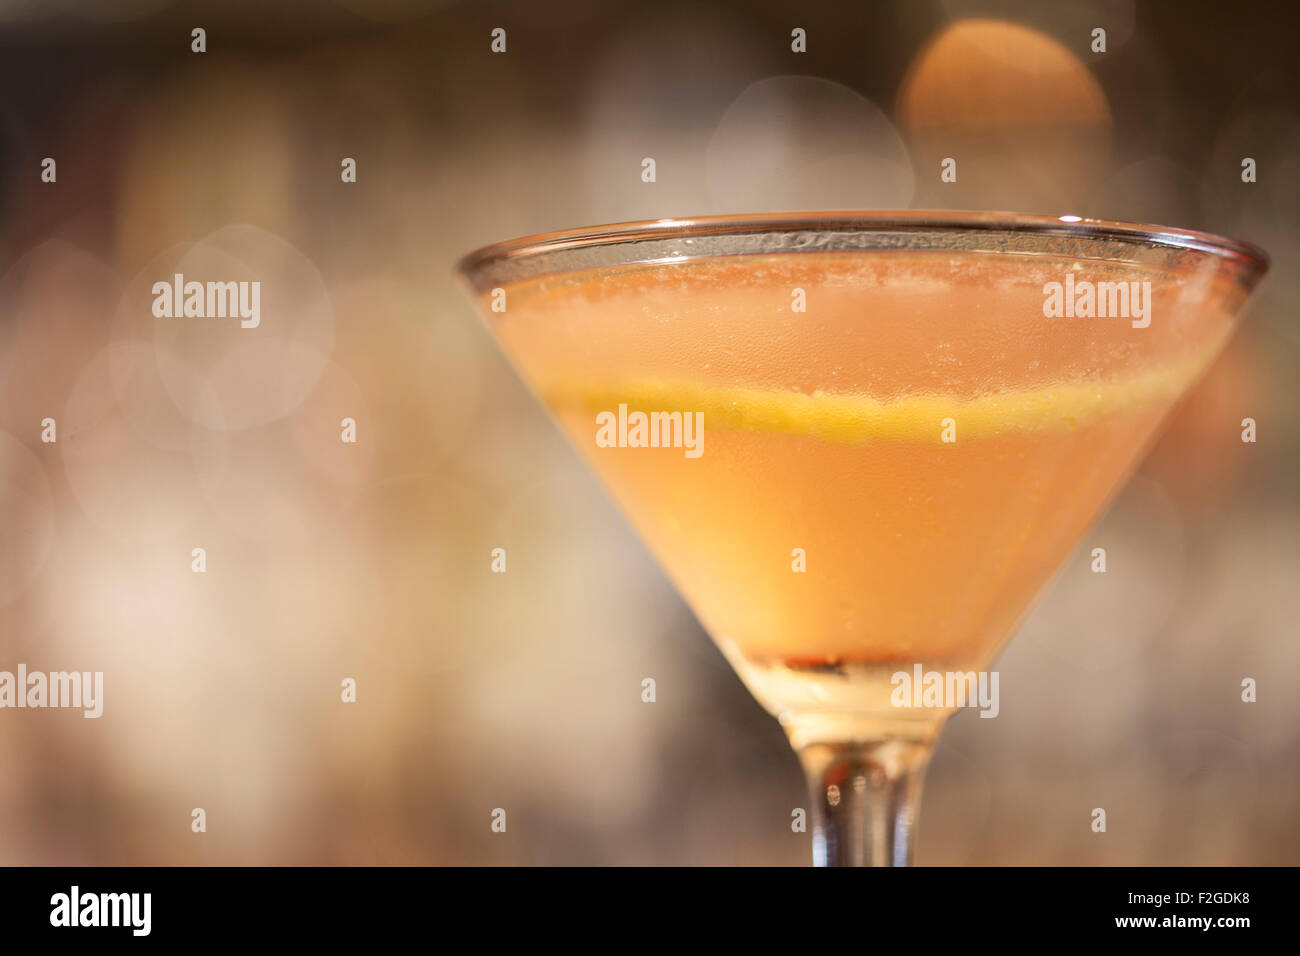 cocktail in martini glass with lemon sliver Stock Photo